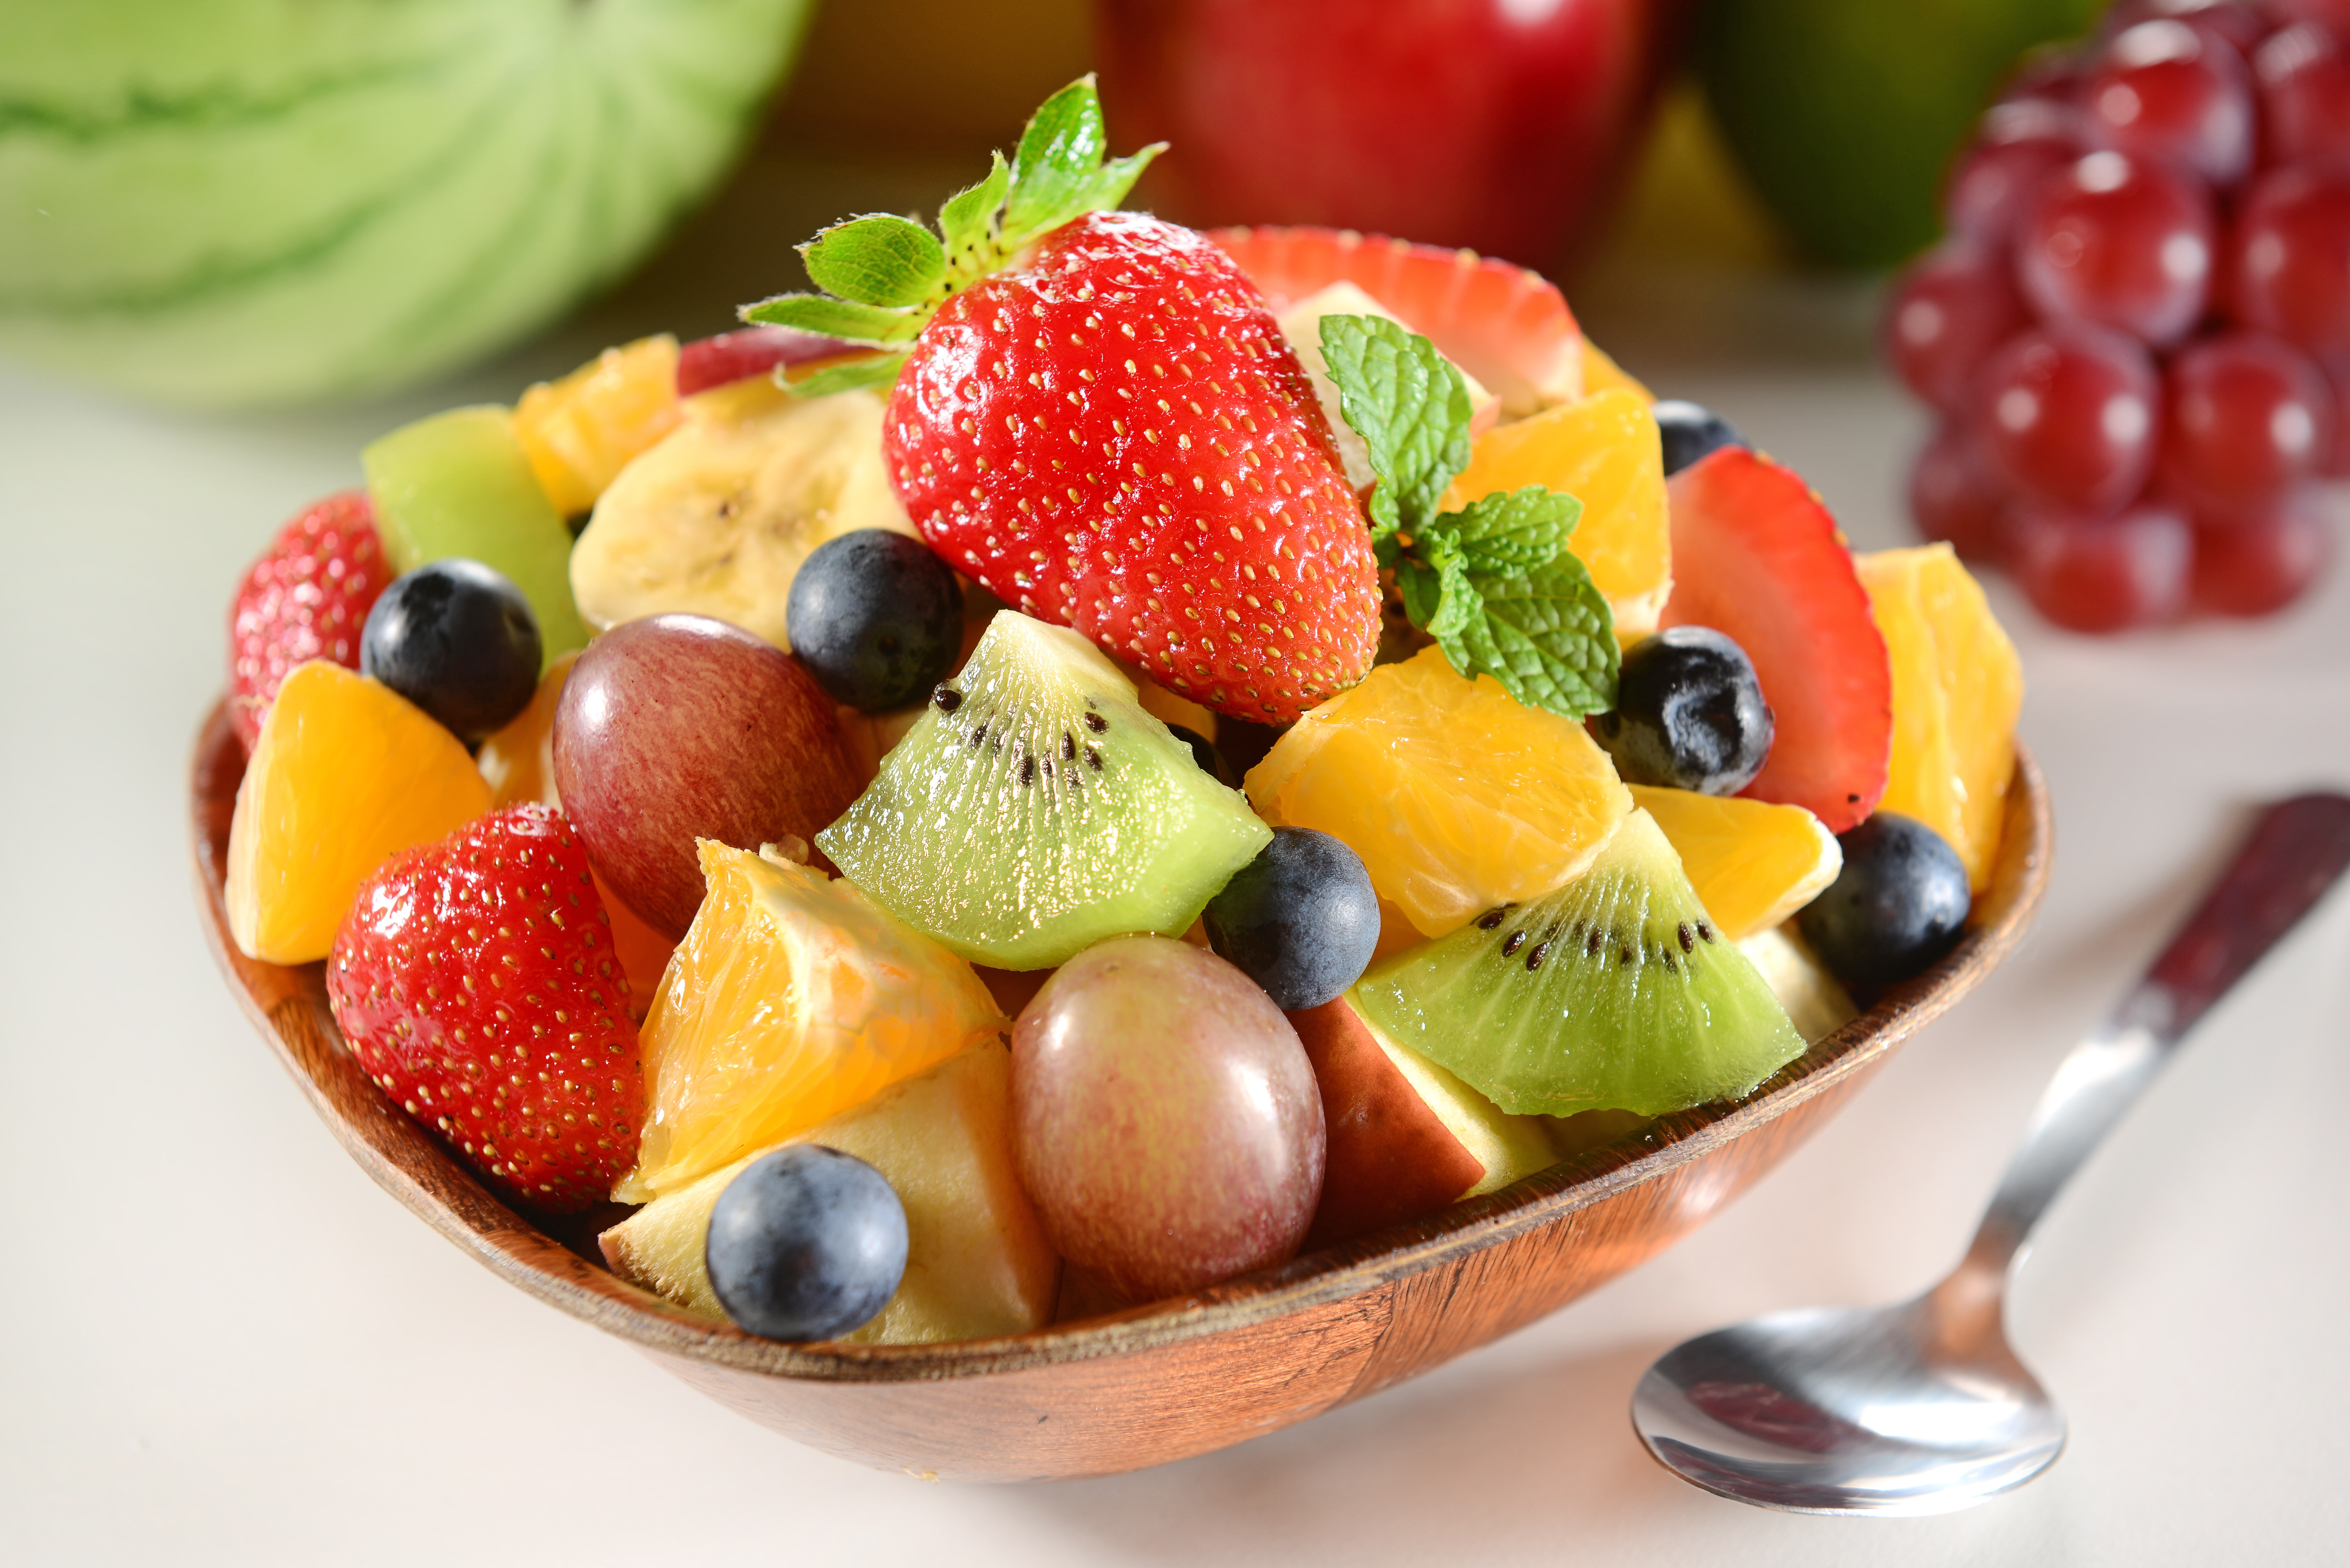 assorted fruits, berries, kiwi, blueberries, strawberry, grapes